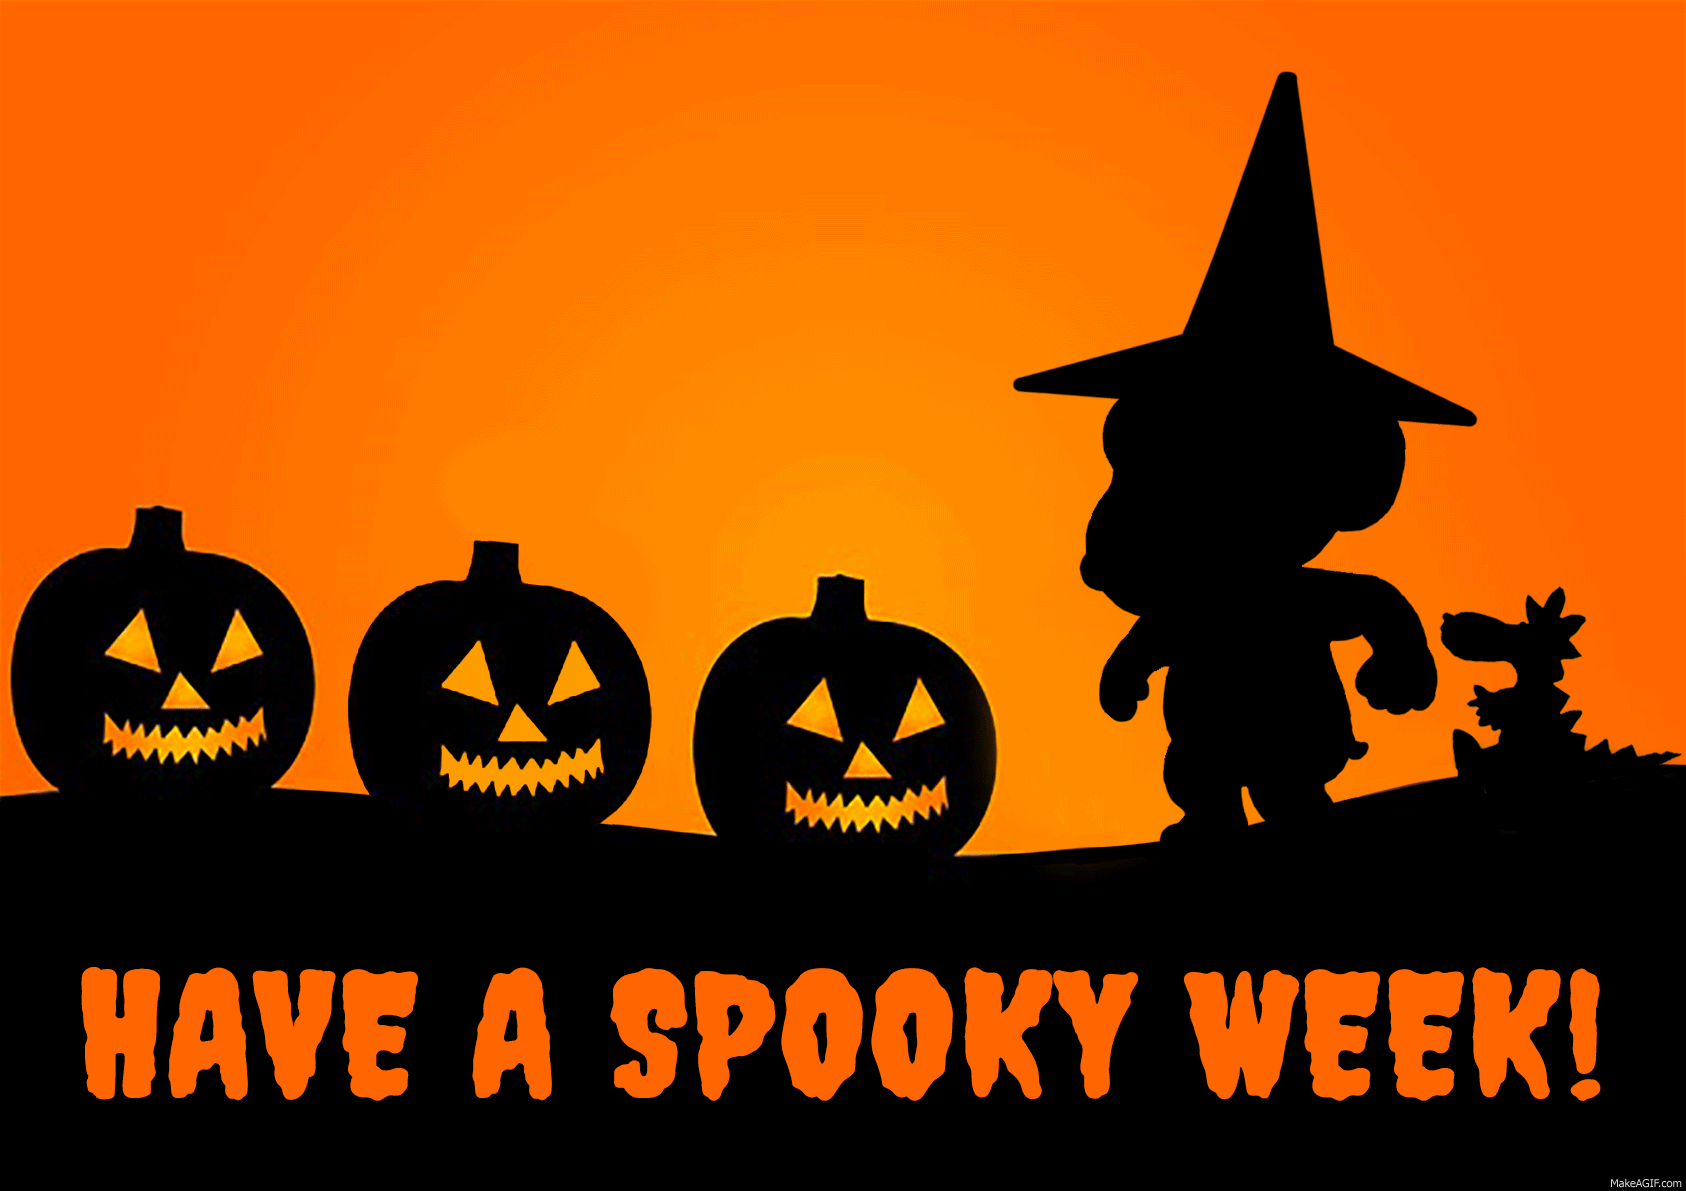 Have a spooky week